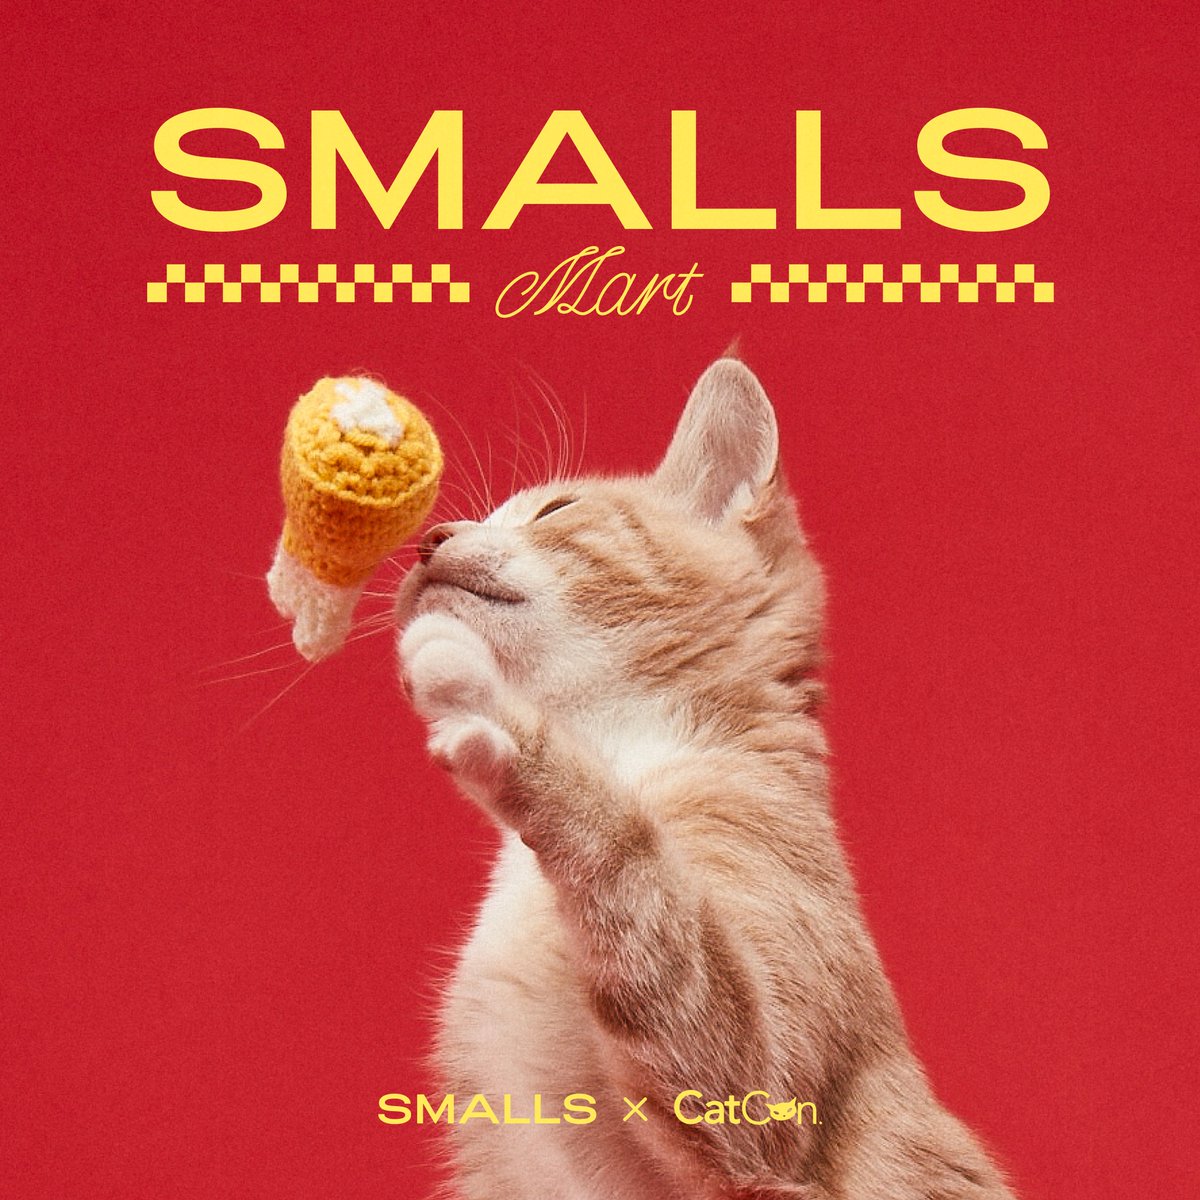 Exciting news. @smallsforcats is returning to CatCon! Join them at Smalls Mart, their vintage supermarket-themed booth to pick up all sorts of goodies. Plus, snag their limited time offer of 10 packets of fresh, human-grade cat food for just $5 (!) See you there!